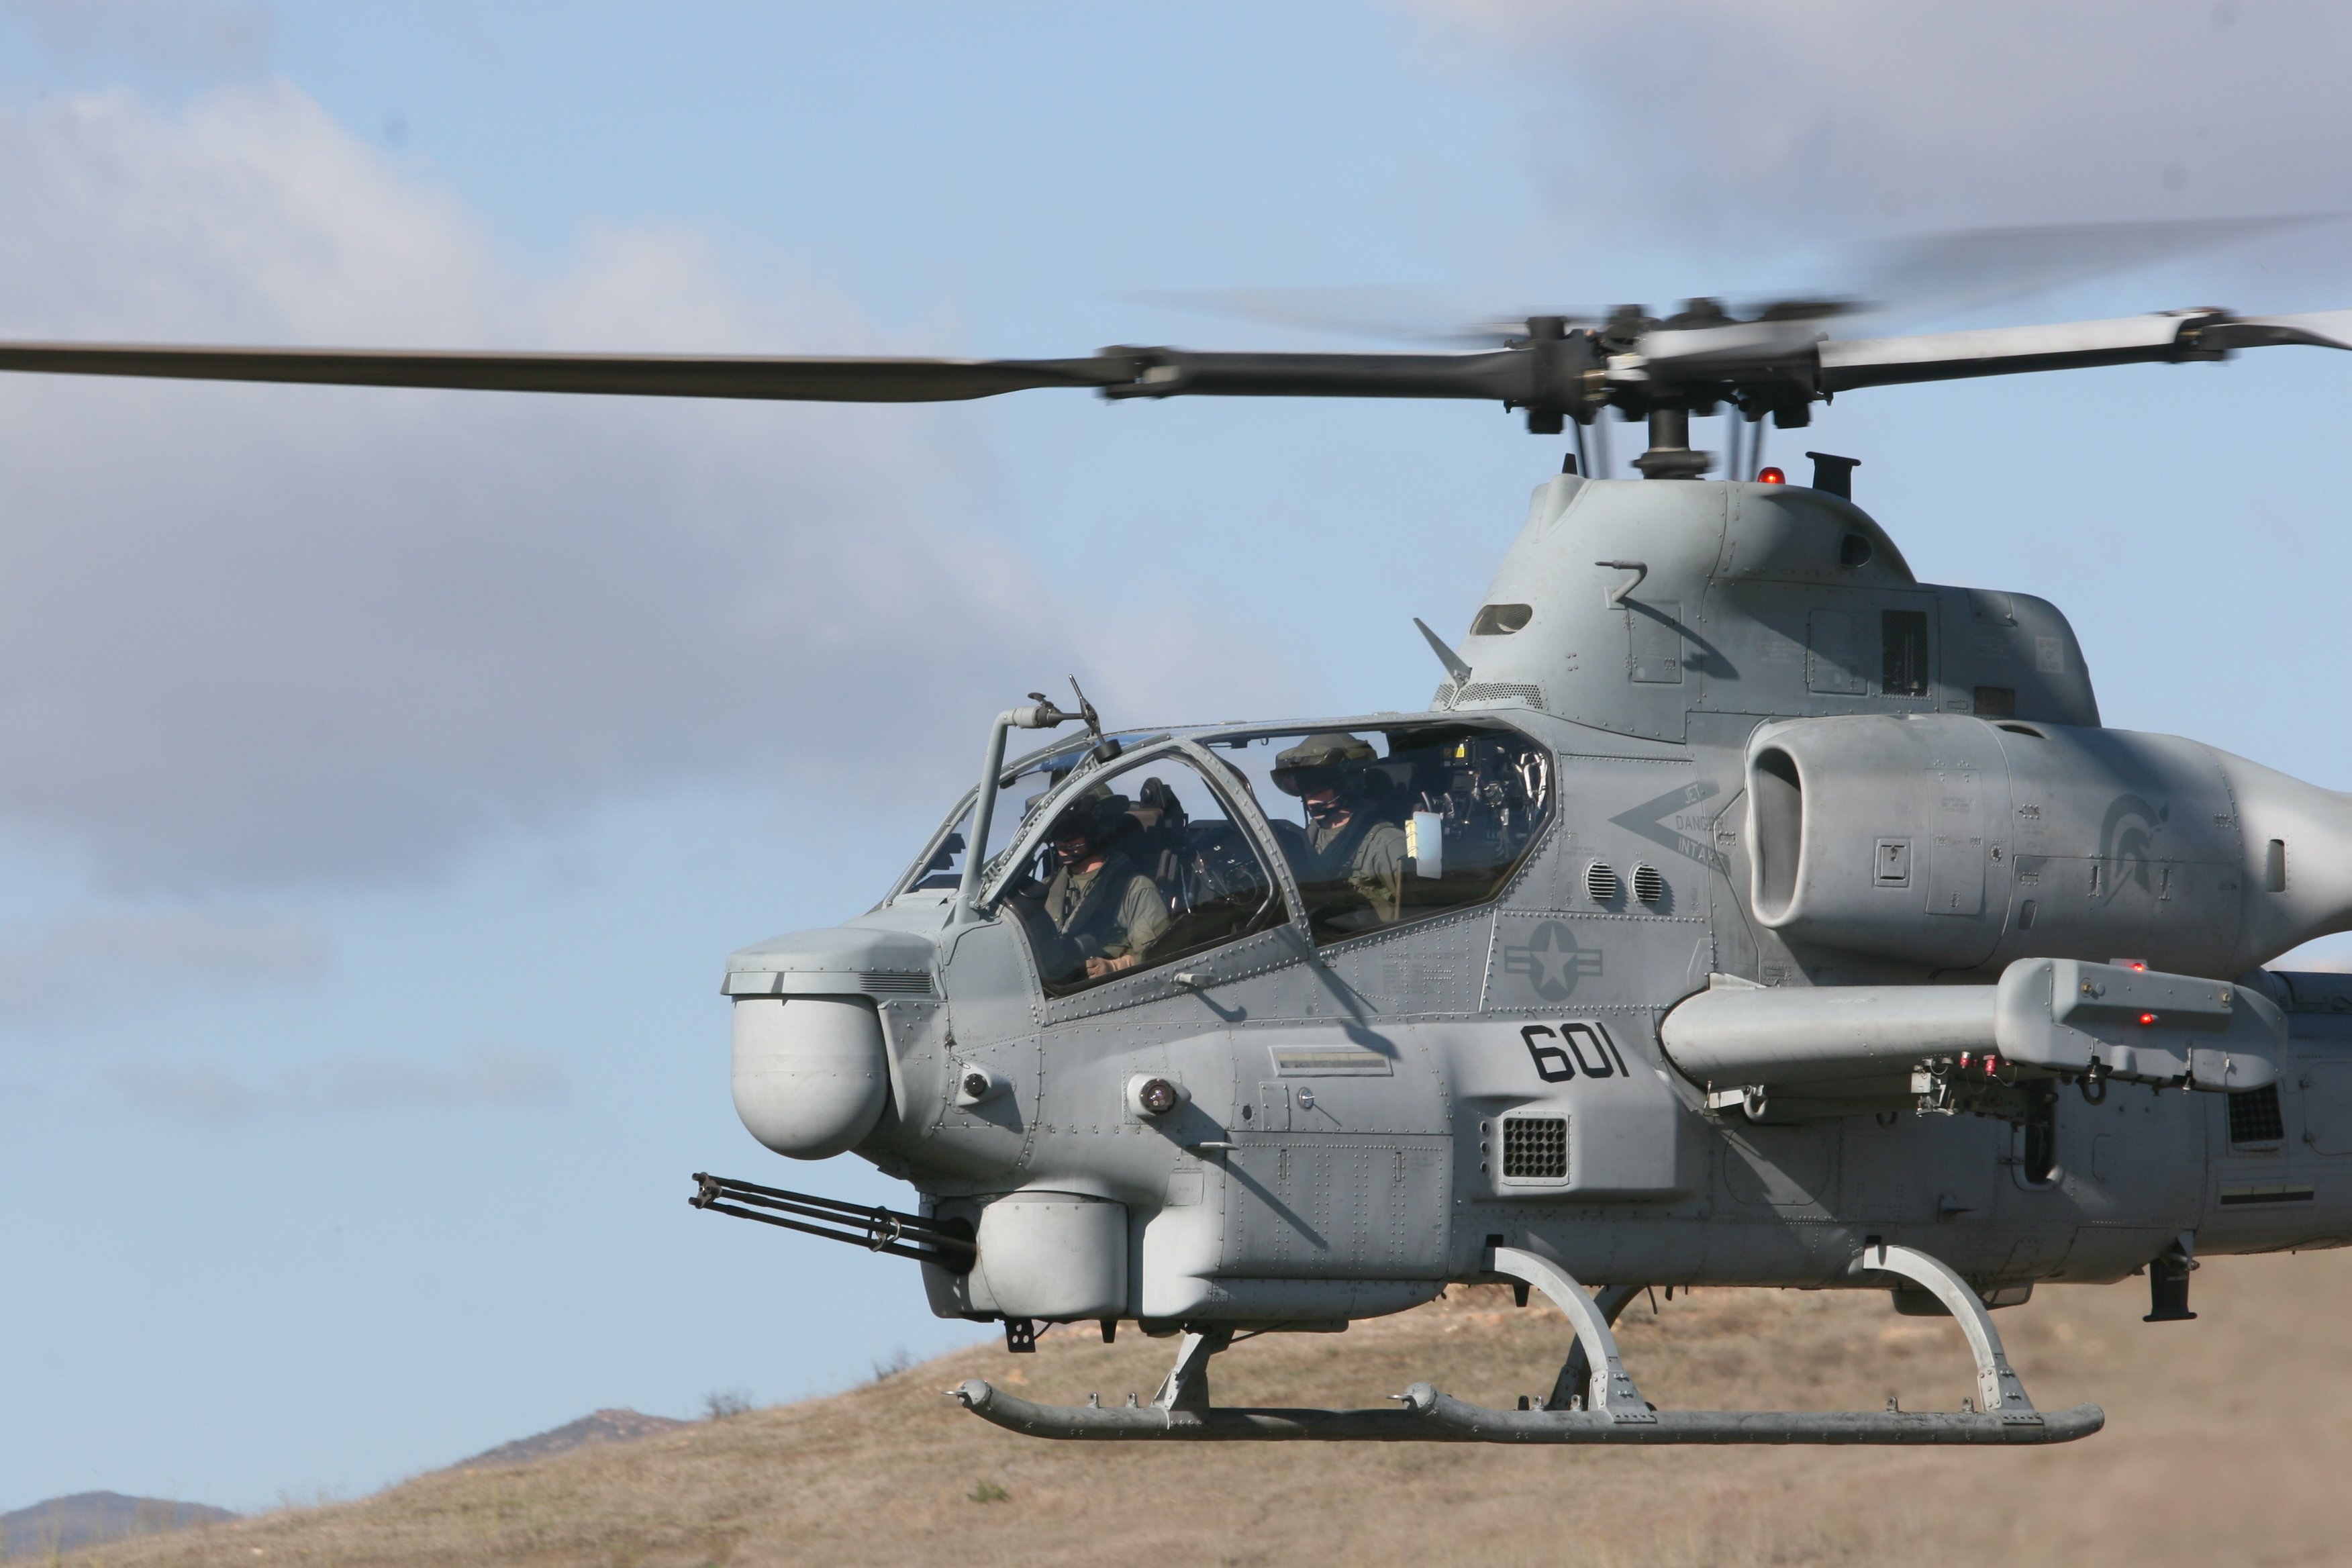 AH 1W SUPER COBRA Attack Helicopter Military Weapon Aircraft (70) Wallpaperx2336